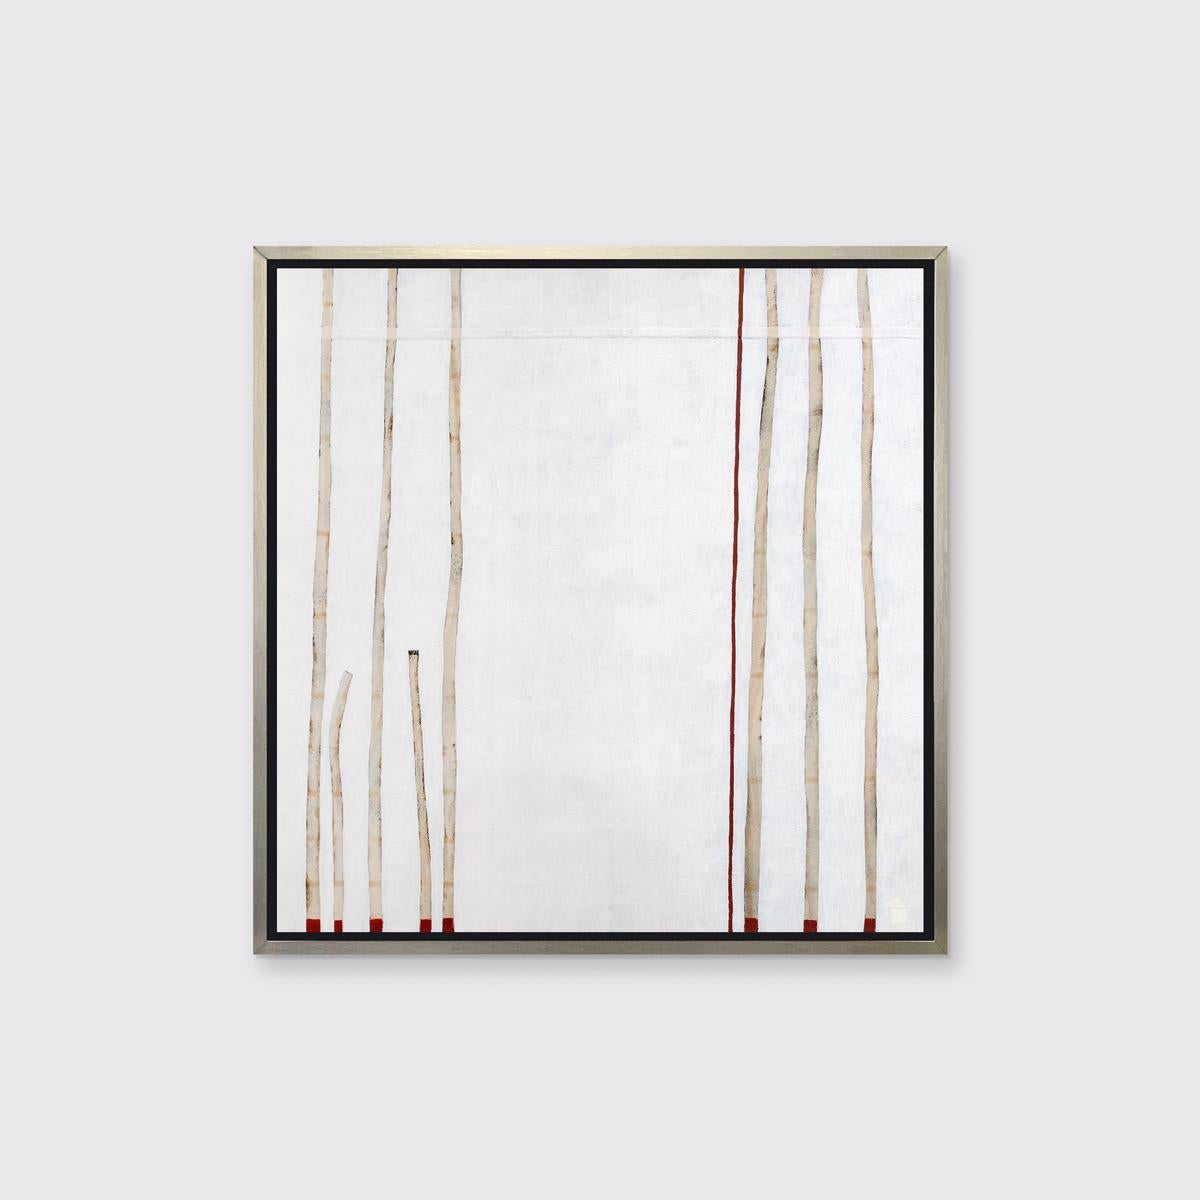 This abstract minimalistic Limited Edition print by Sofie Swann features a warm neutral palette. In it, organic, imperfect light beige rectangles extend up from smaller, deep red squares at the bottom of the composition. They reach the top toward